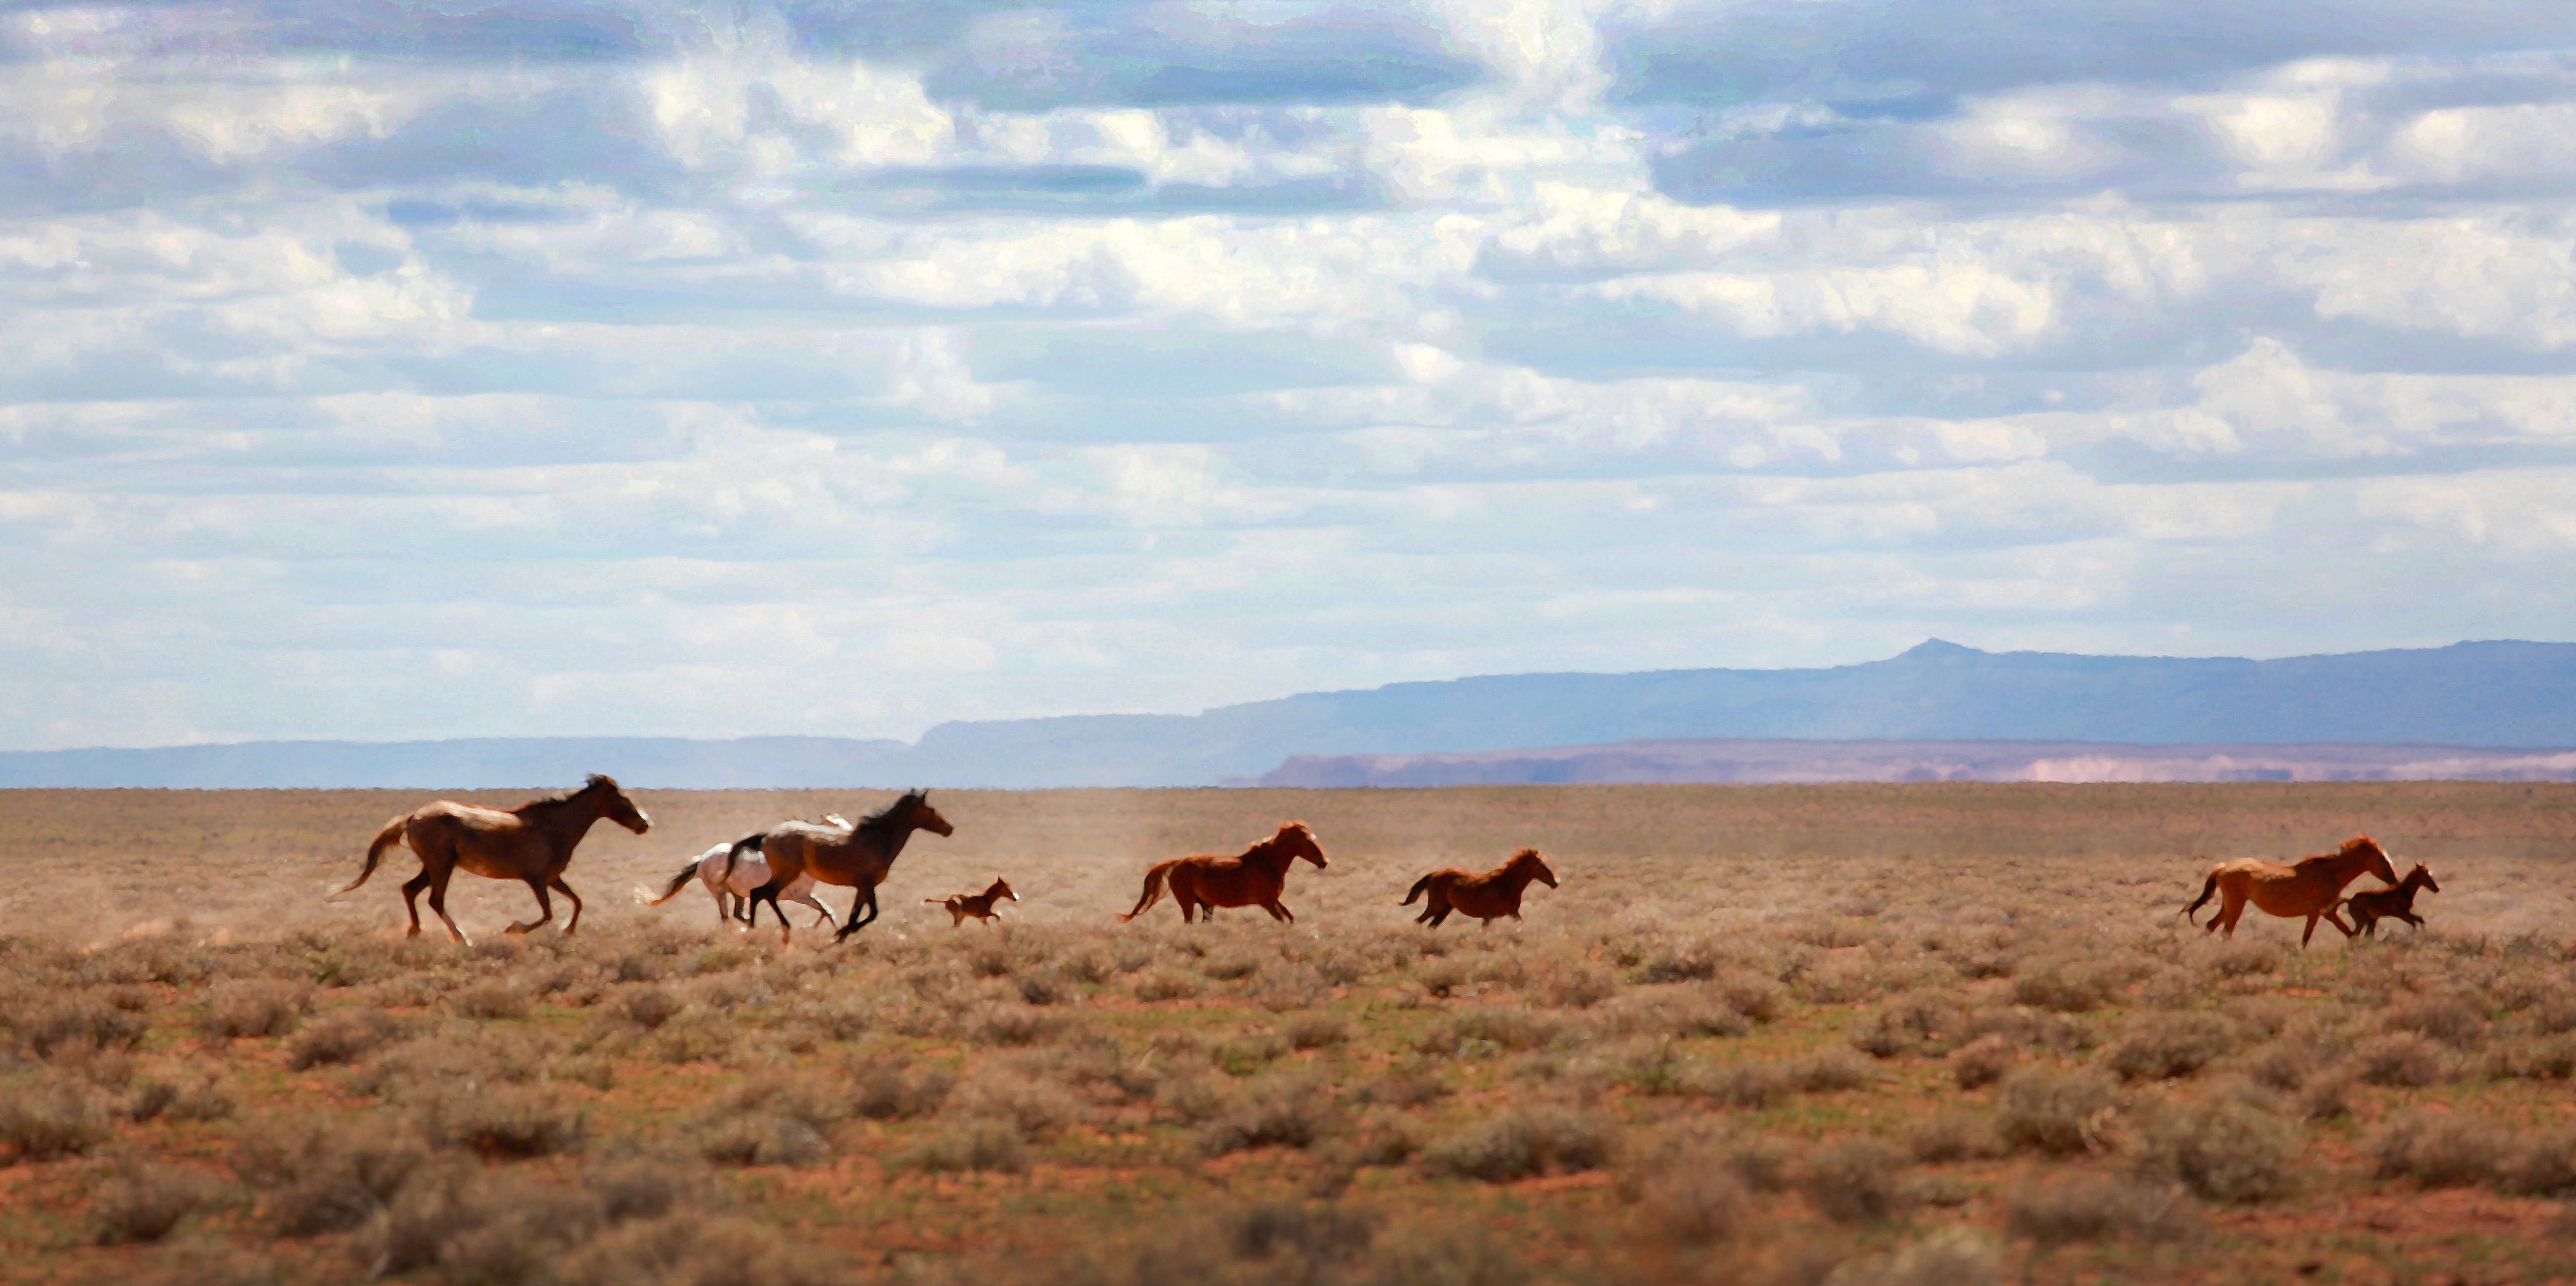 Horses and colts running wild on the Navajo Nation Indian Reservation in Arizona USA near Indian Wells (Virginia Star/ Getty Images)